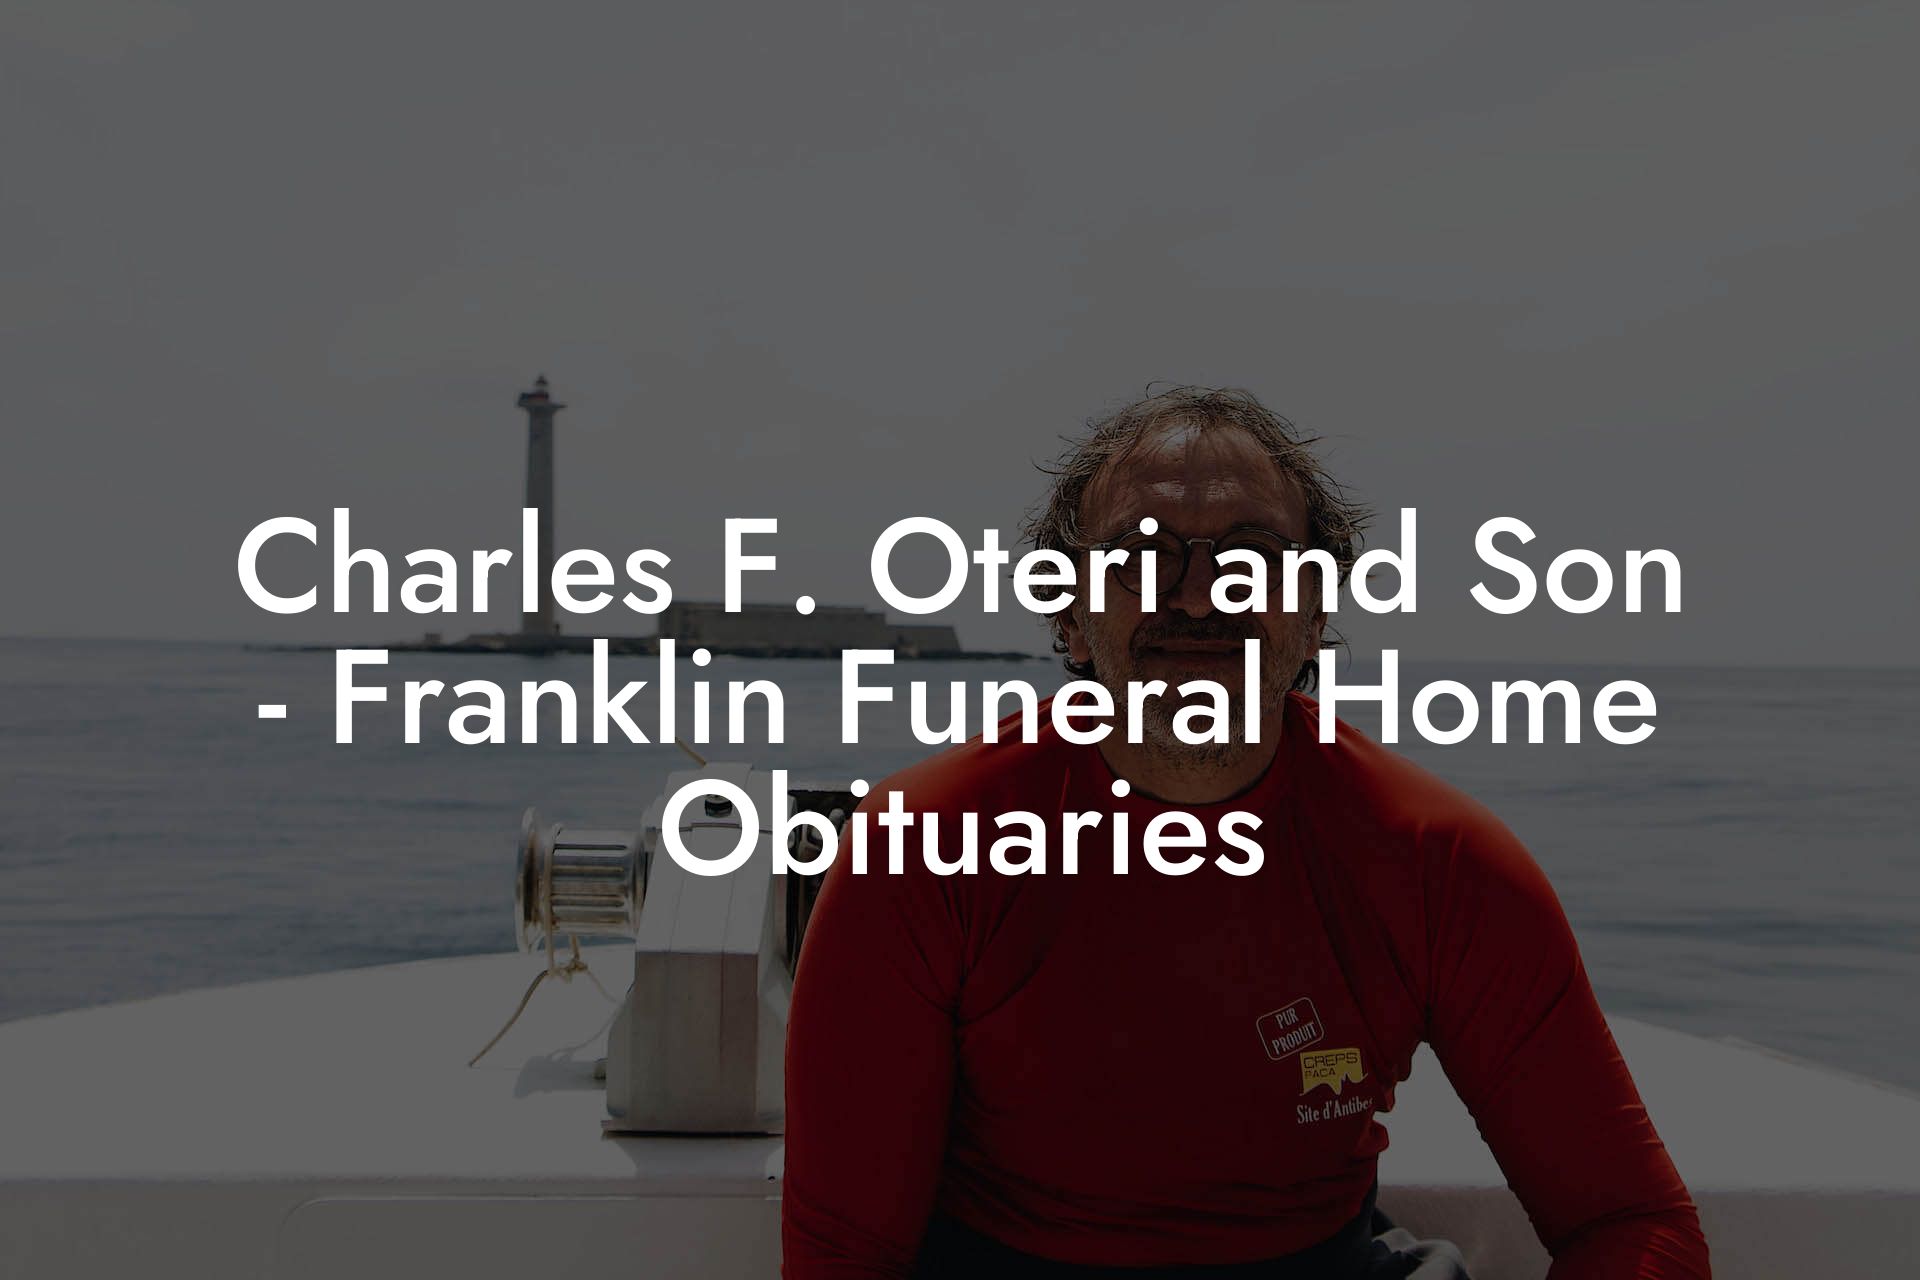 Charles F. Oteri and Son - Franklin Funeral Home Obituaries